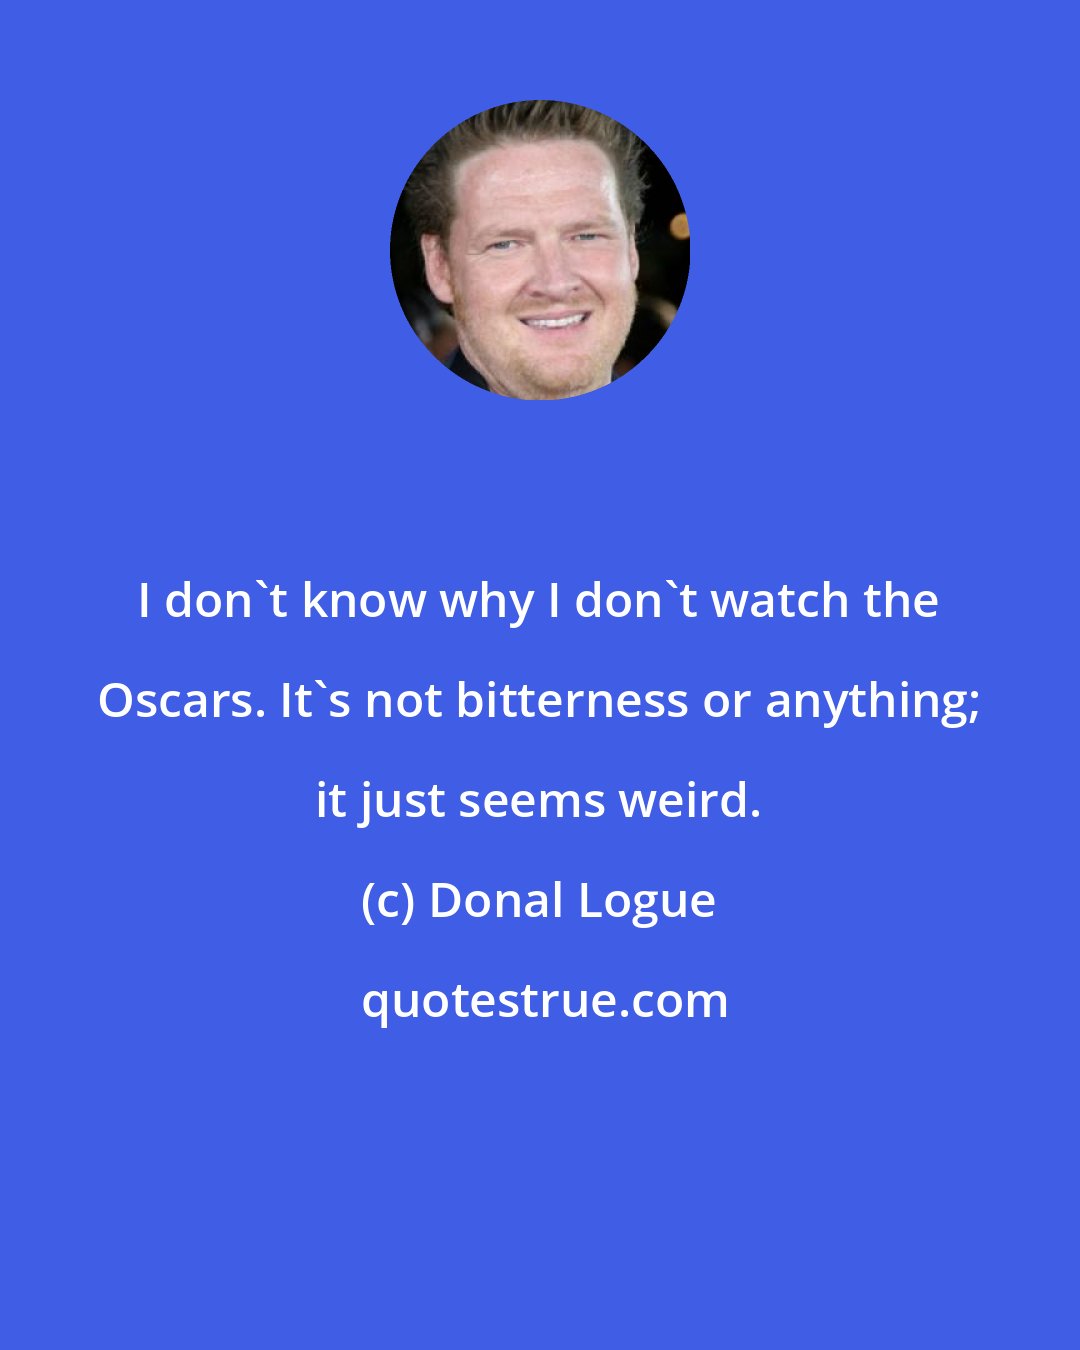 Donal Logue: I don't know why I don't watch the Oscars. It's not bitterness or anything; it just seems weird.